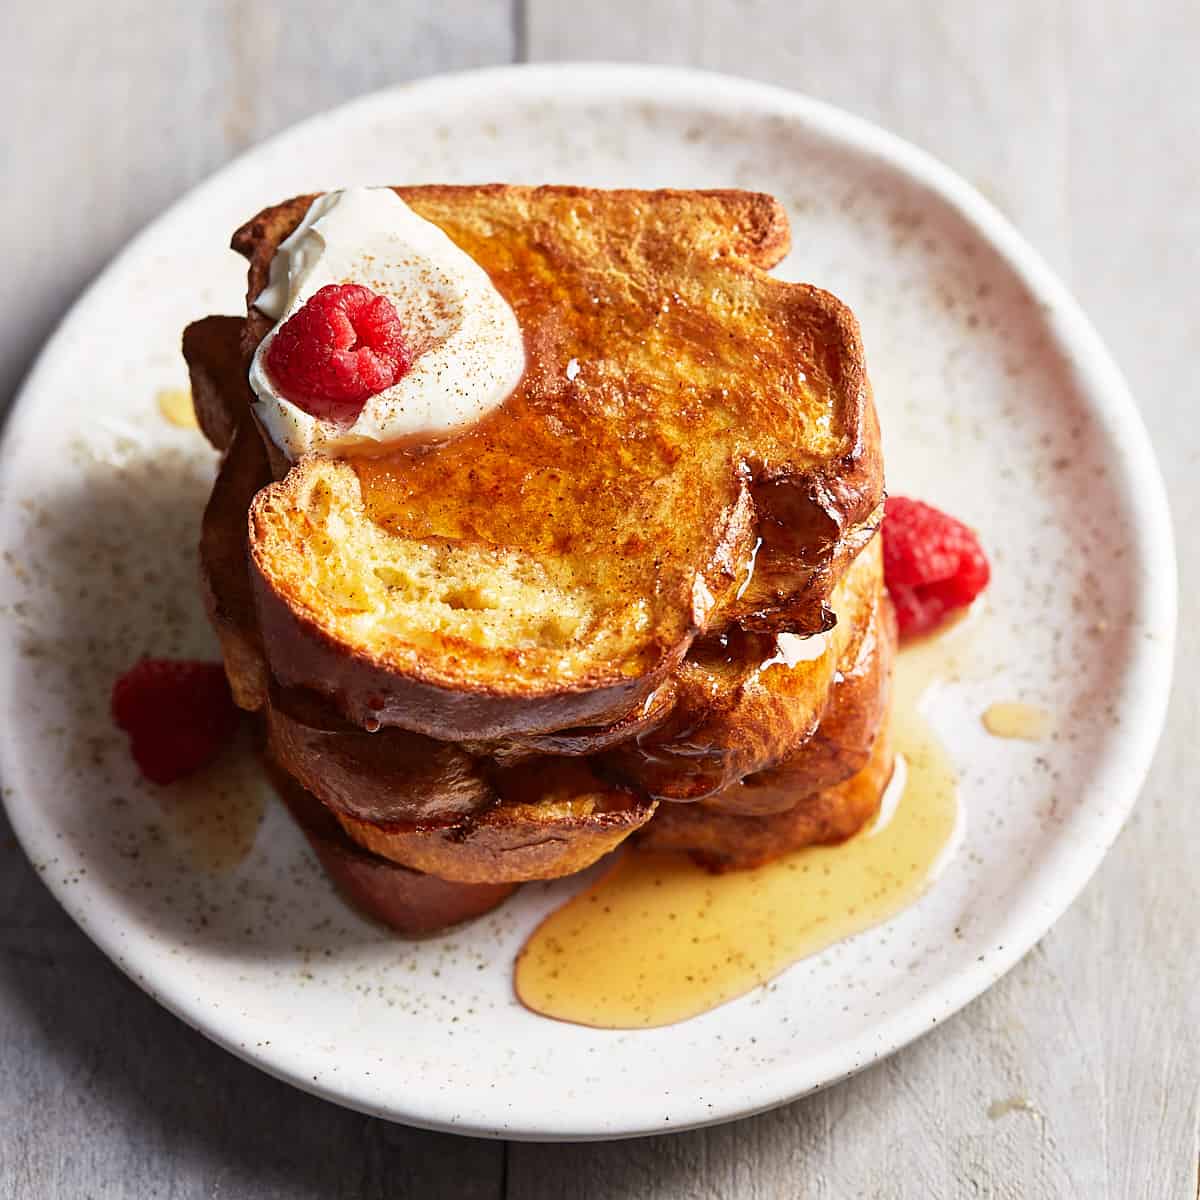 A stack of French toast topped with maple syrup, whipped cream, and raspberries